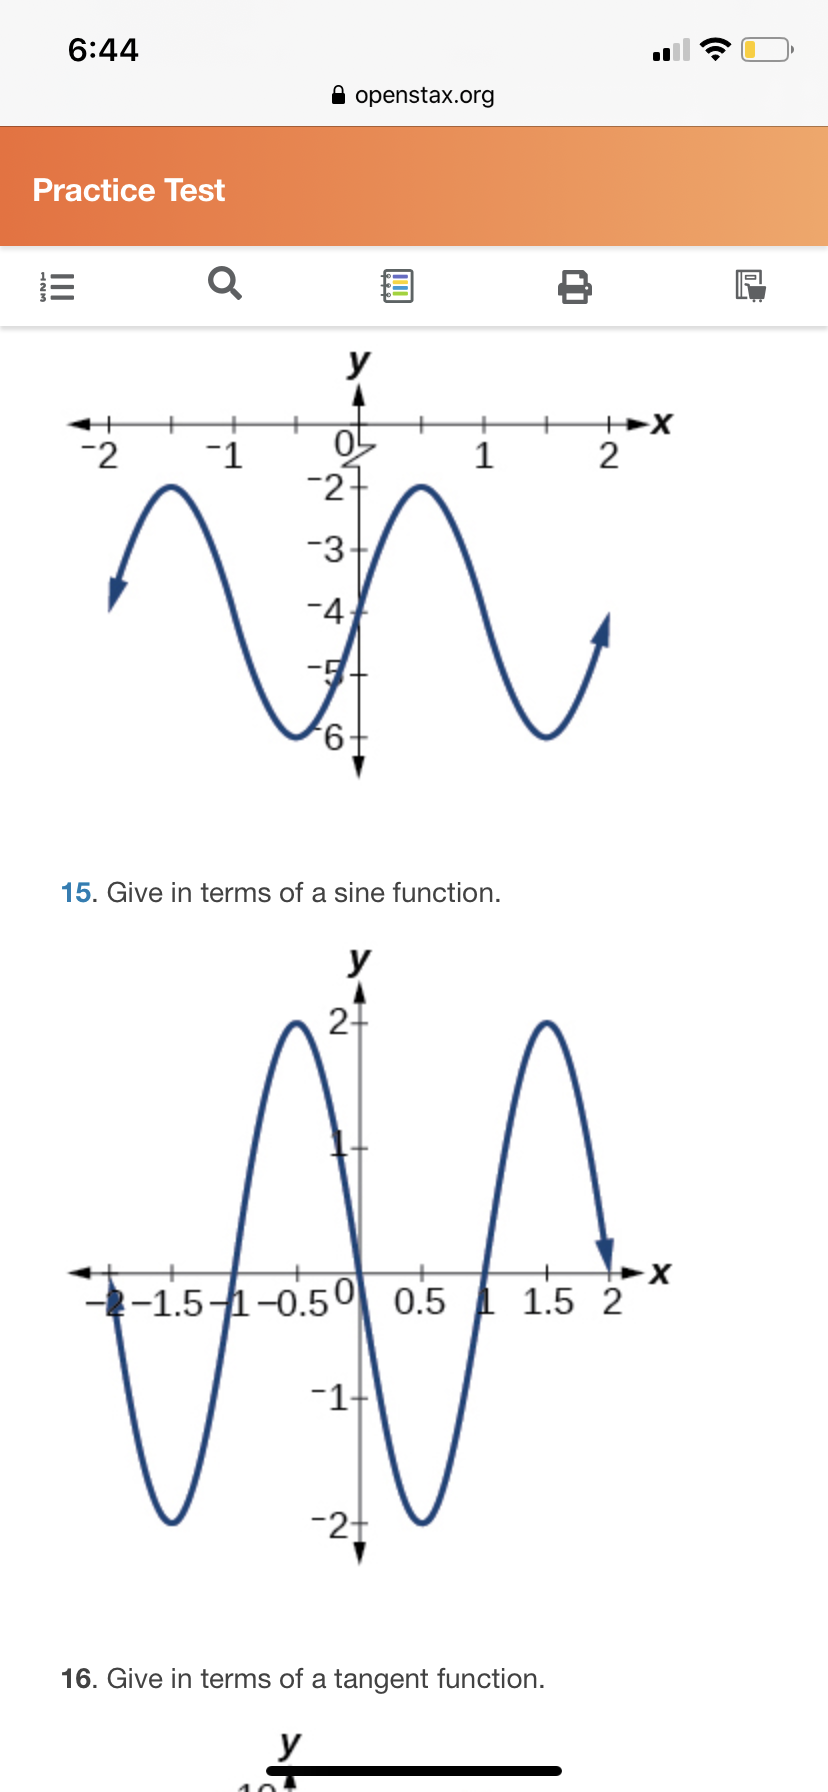 6:44
A openstax.org
Practice Test
y
-2
-1
2
-2
-3
-4
-7-
-9,
15. Give in terms of a sine function.
У
21
--1.5-1-0.50 0.5 1 1.5 2
-1-
-2f
16. Give in terms of a tangent function.
У
II
